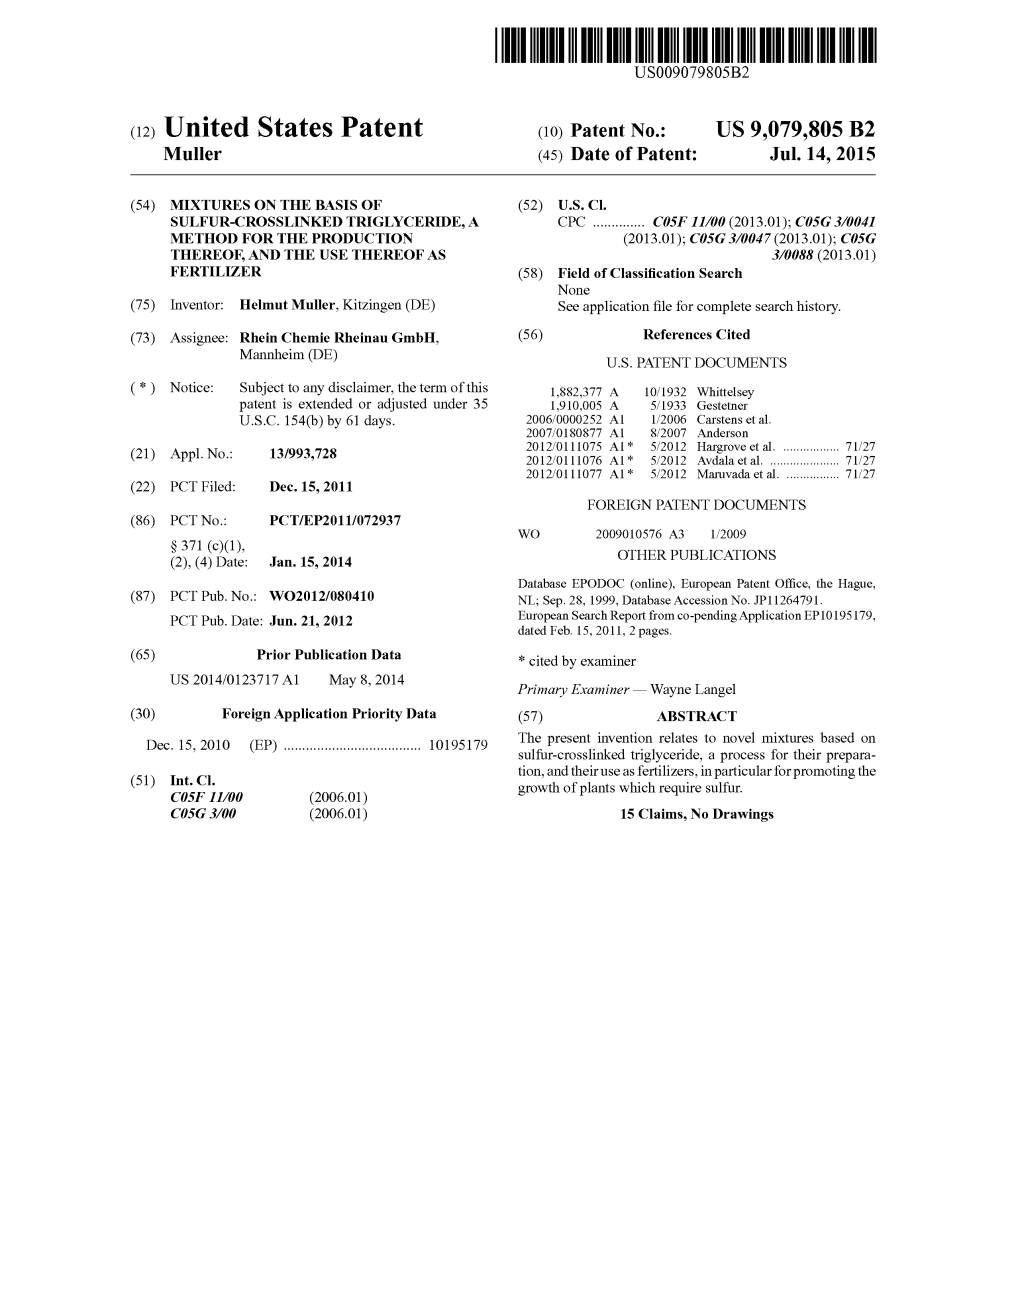 (12) United States Patent (10) Patent No.: US 9,079,805 B2 Muller (45) Date of Patent: Jul